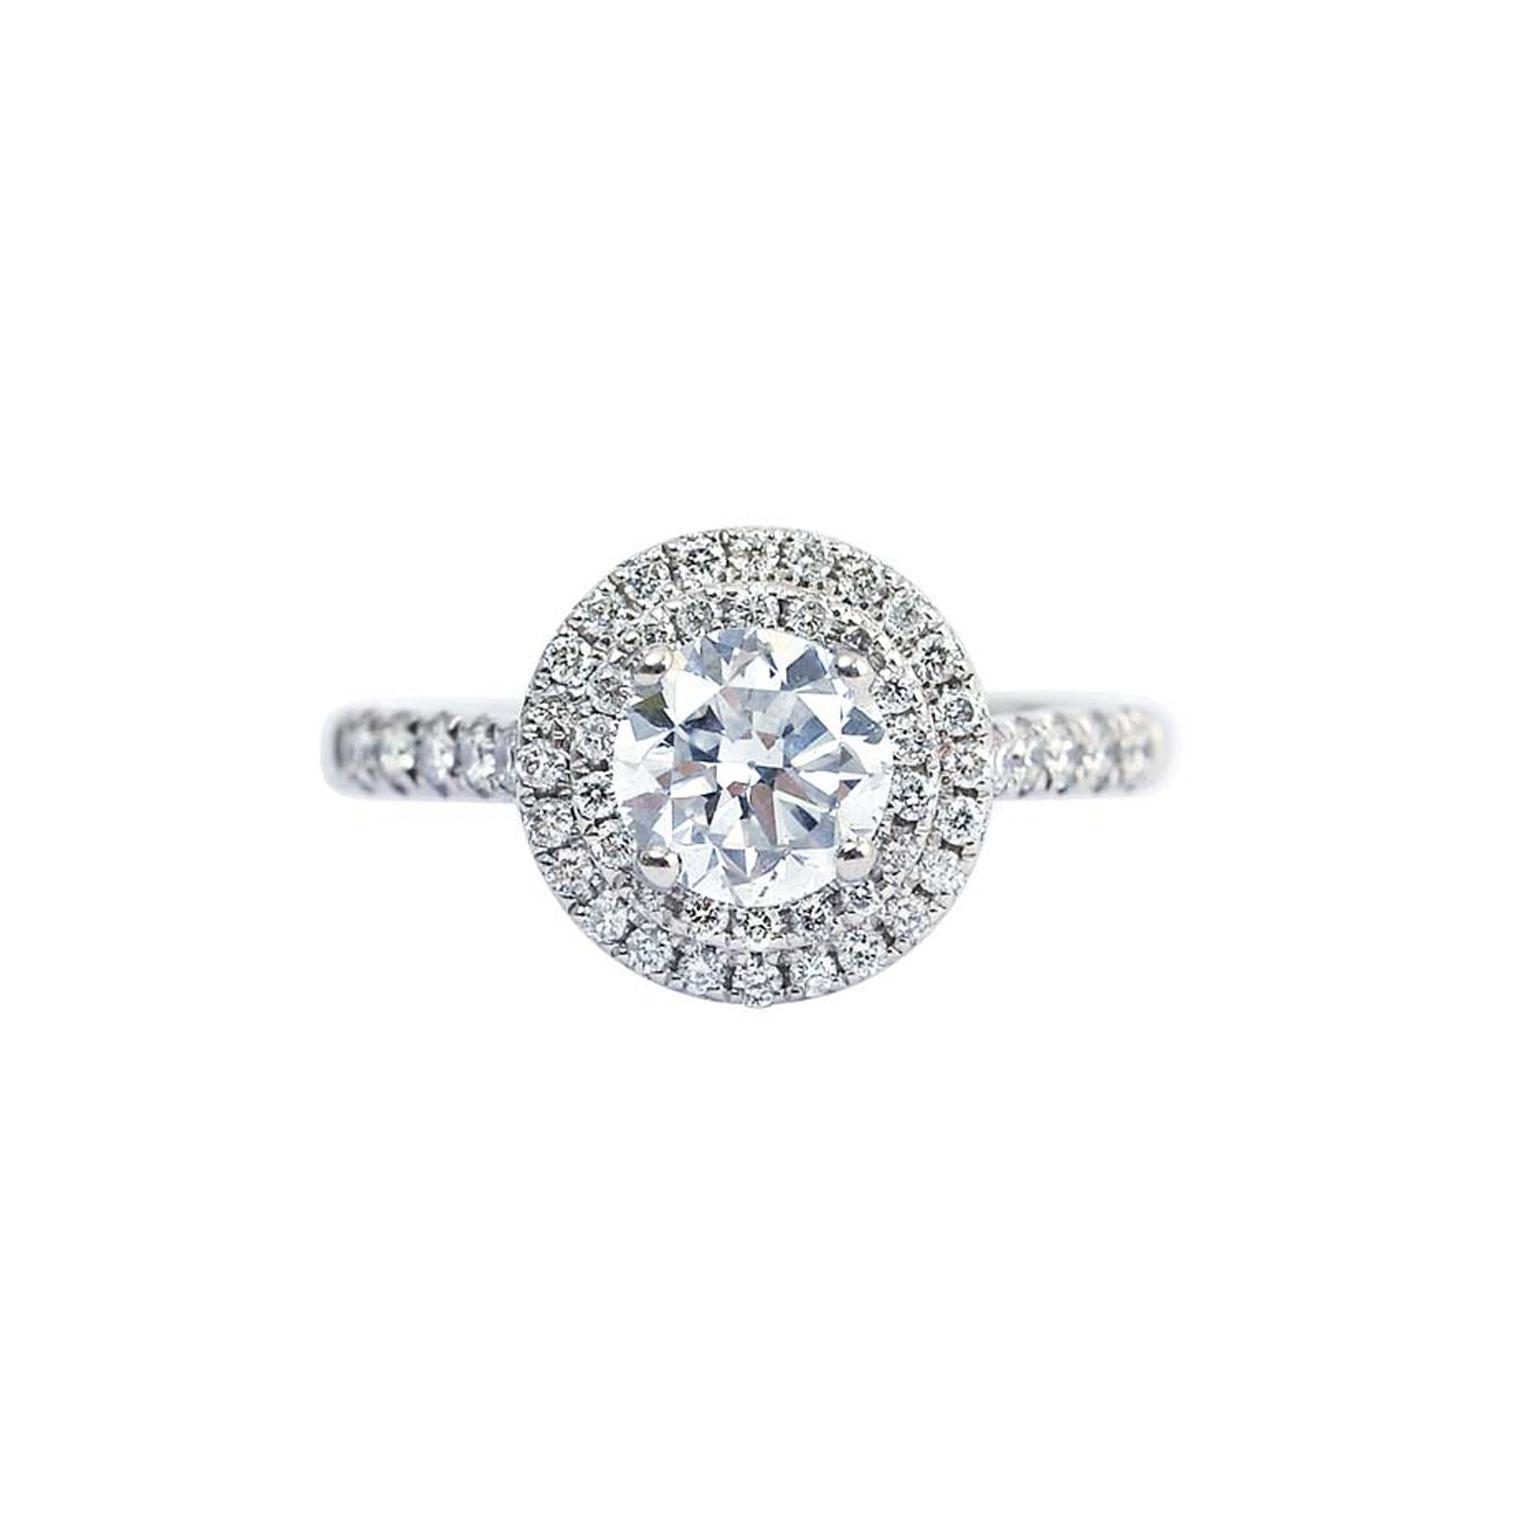 Gee Woods' finished diamond engagement ring featuring a brilliant-cut diamond surrounded by a melée of diamonds.